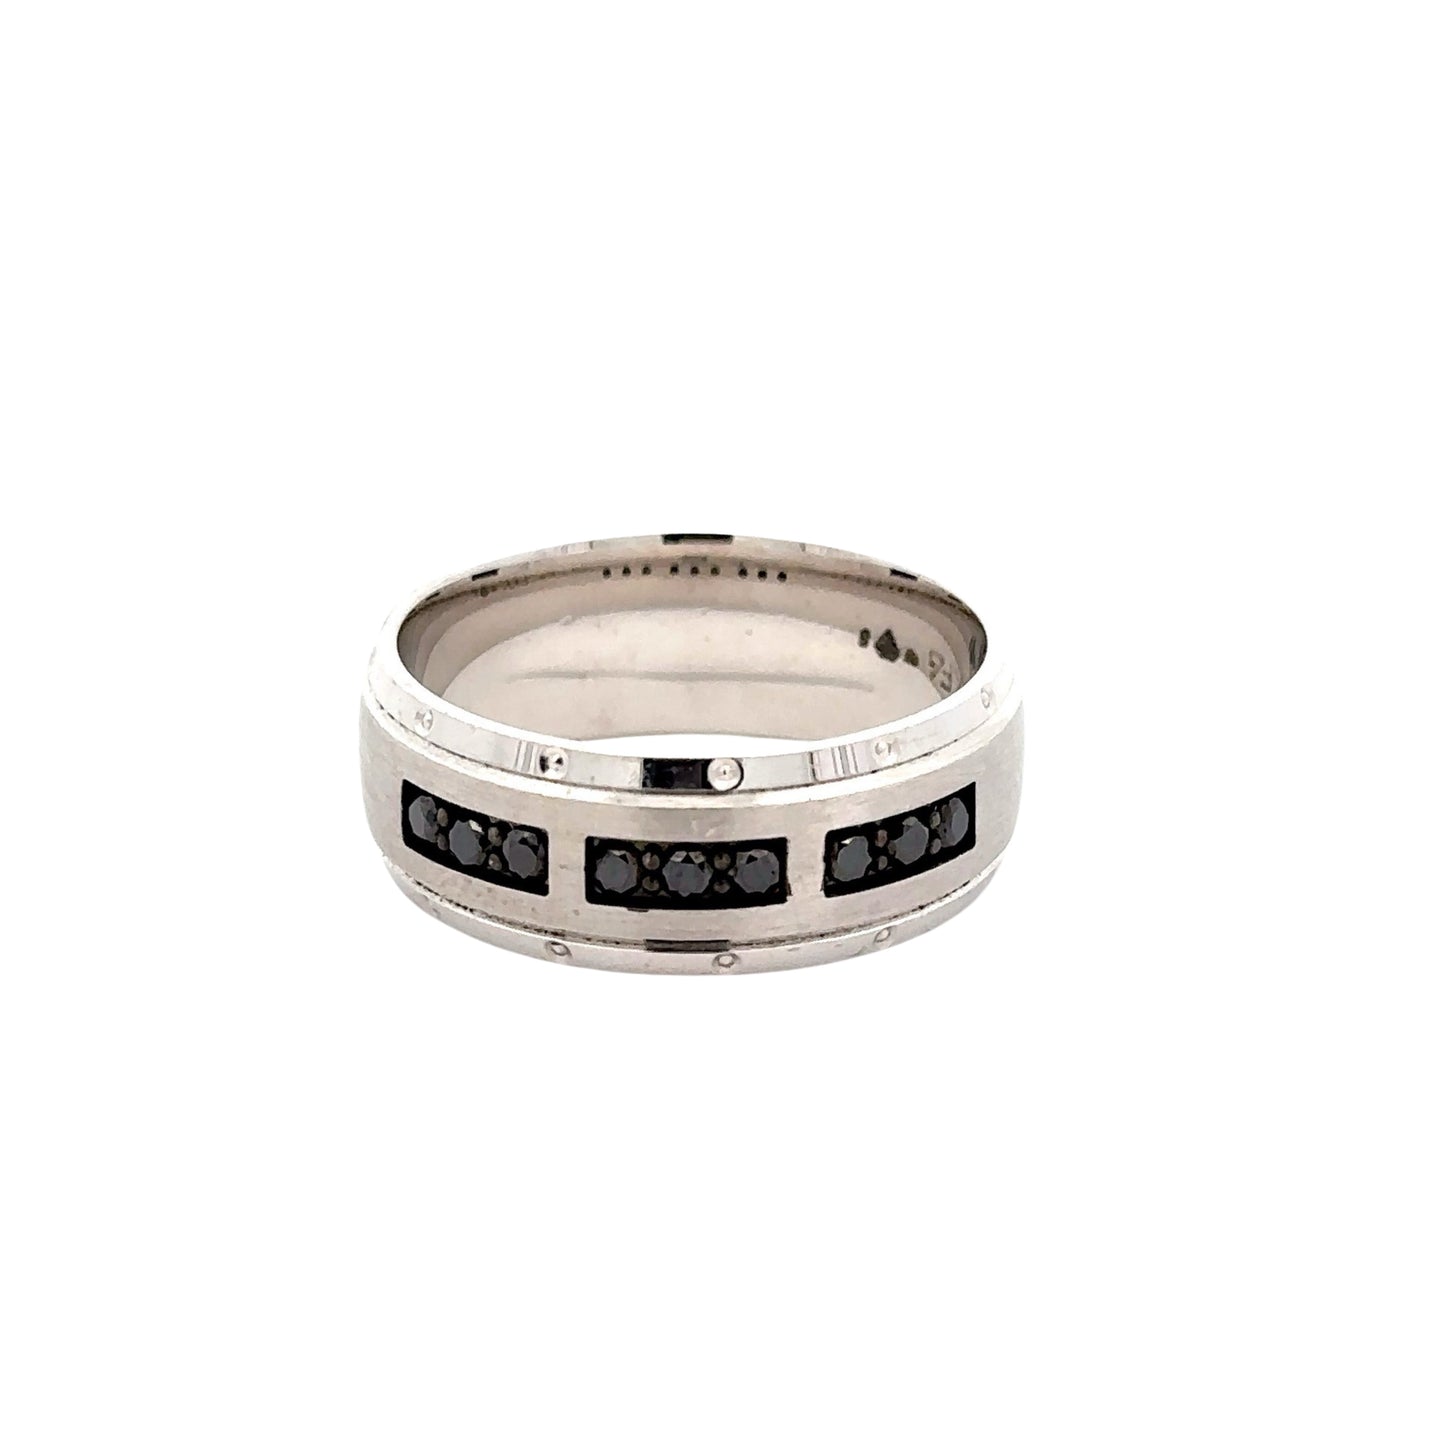 White Gold men's band ring with 9 small round black diamonds on the band